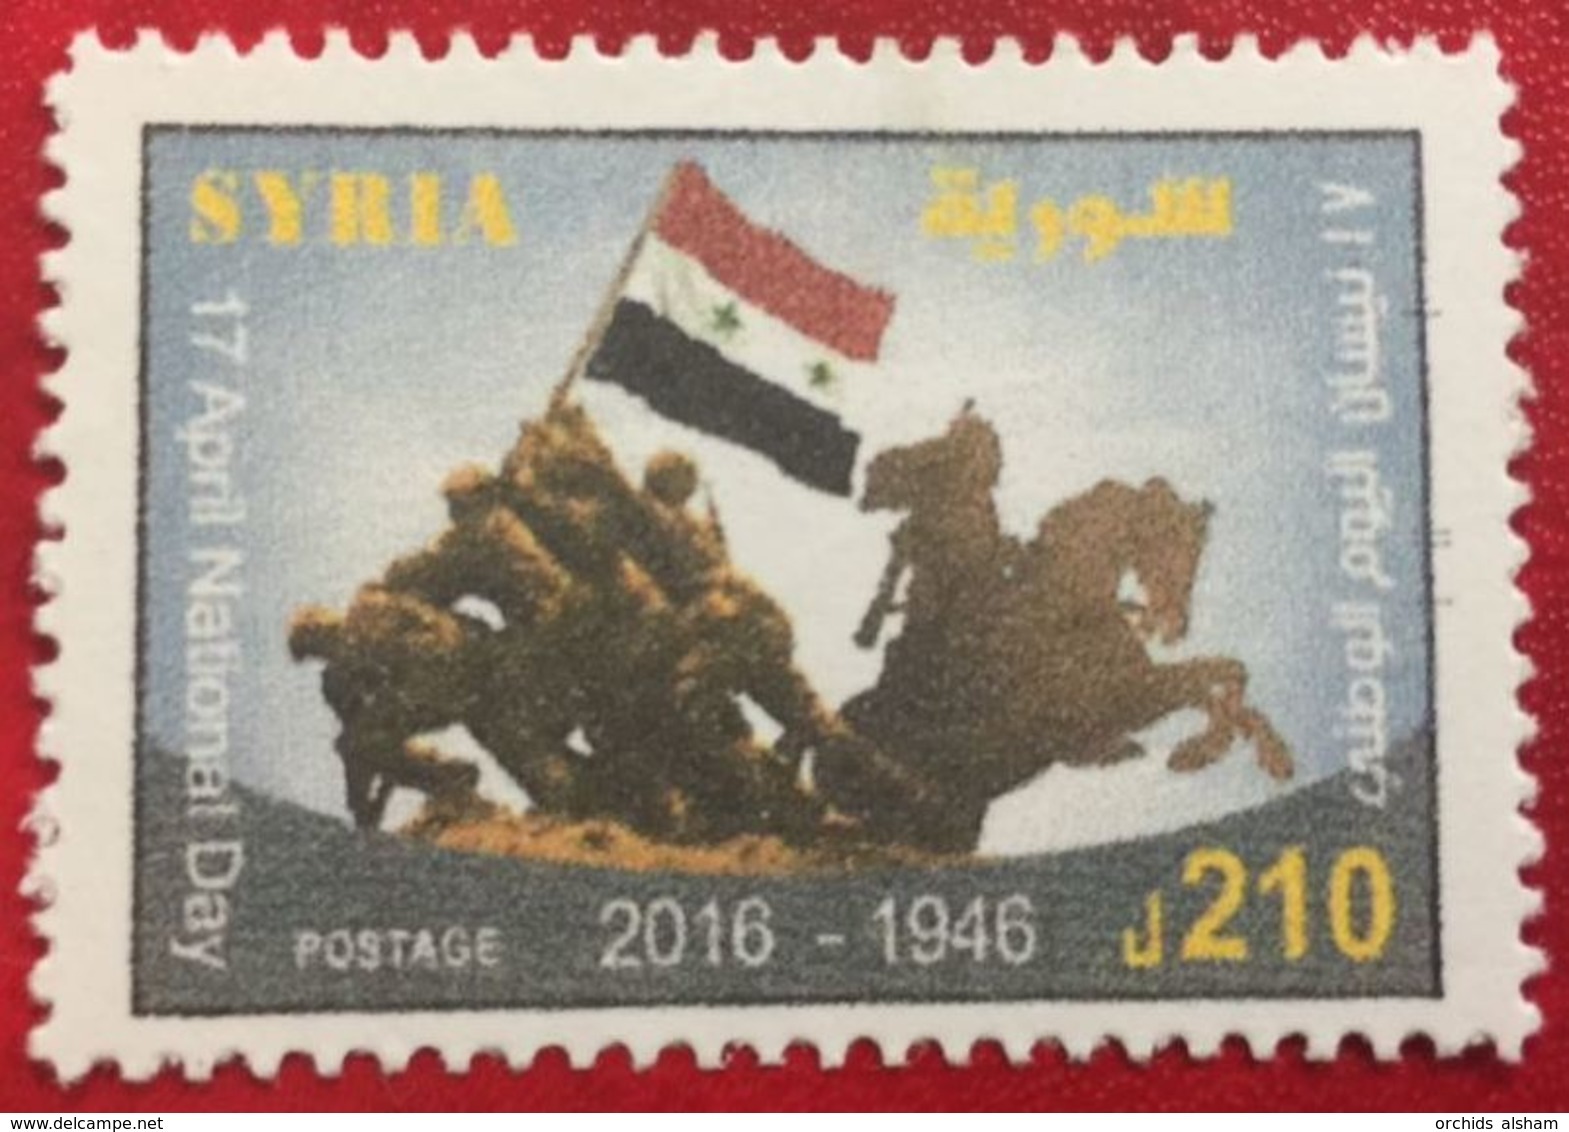 Syria 2016 MNH Very Rare Stamp - Evacuation. Photo Representing US Soldiers And Syrian! Stamp Withdr - Syria